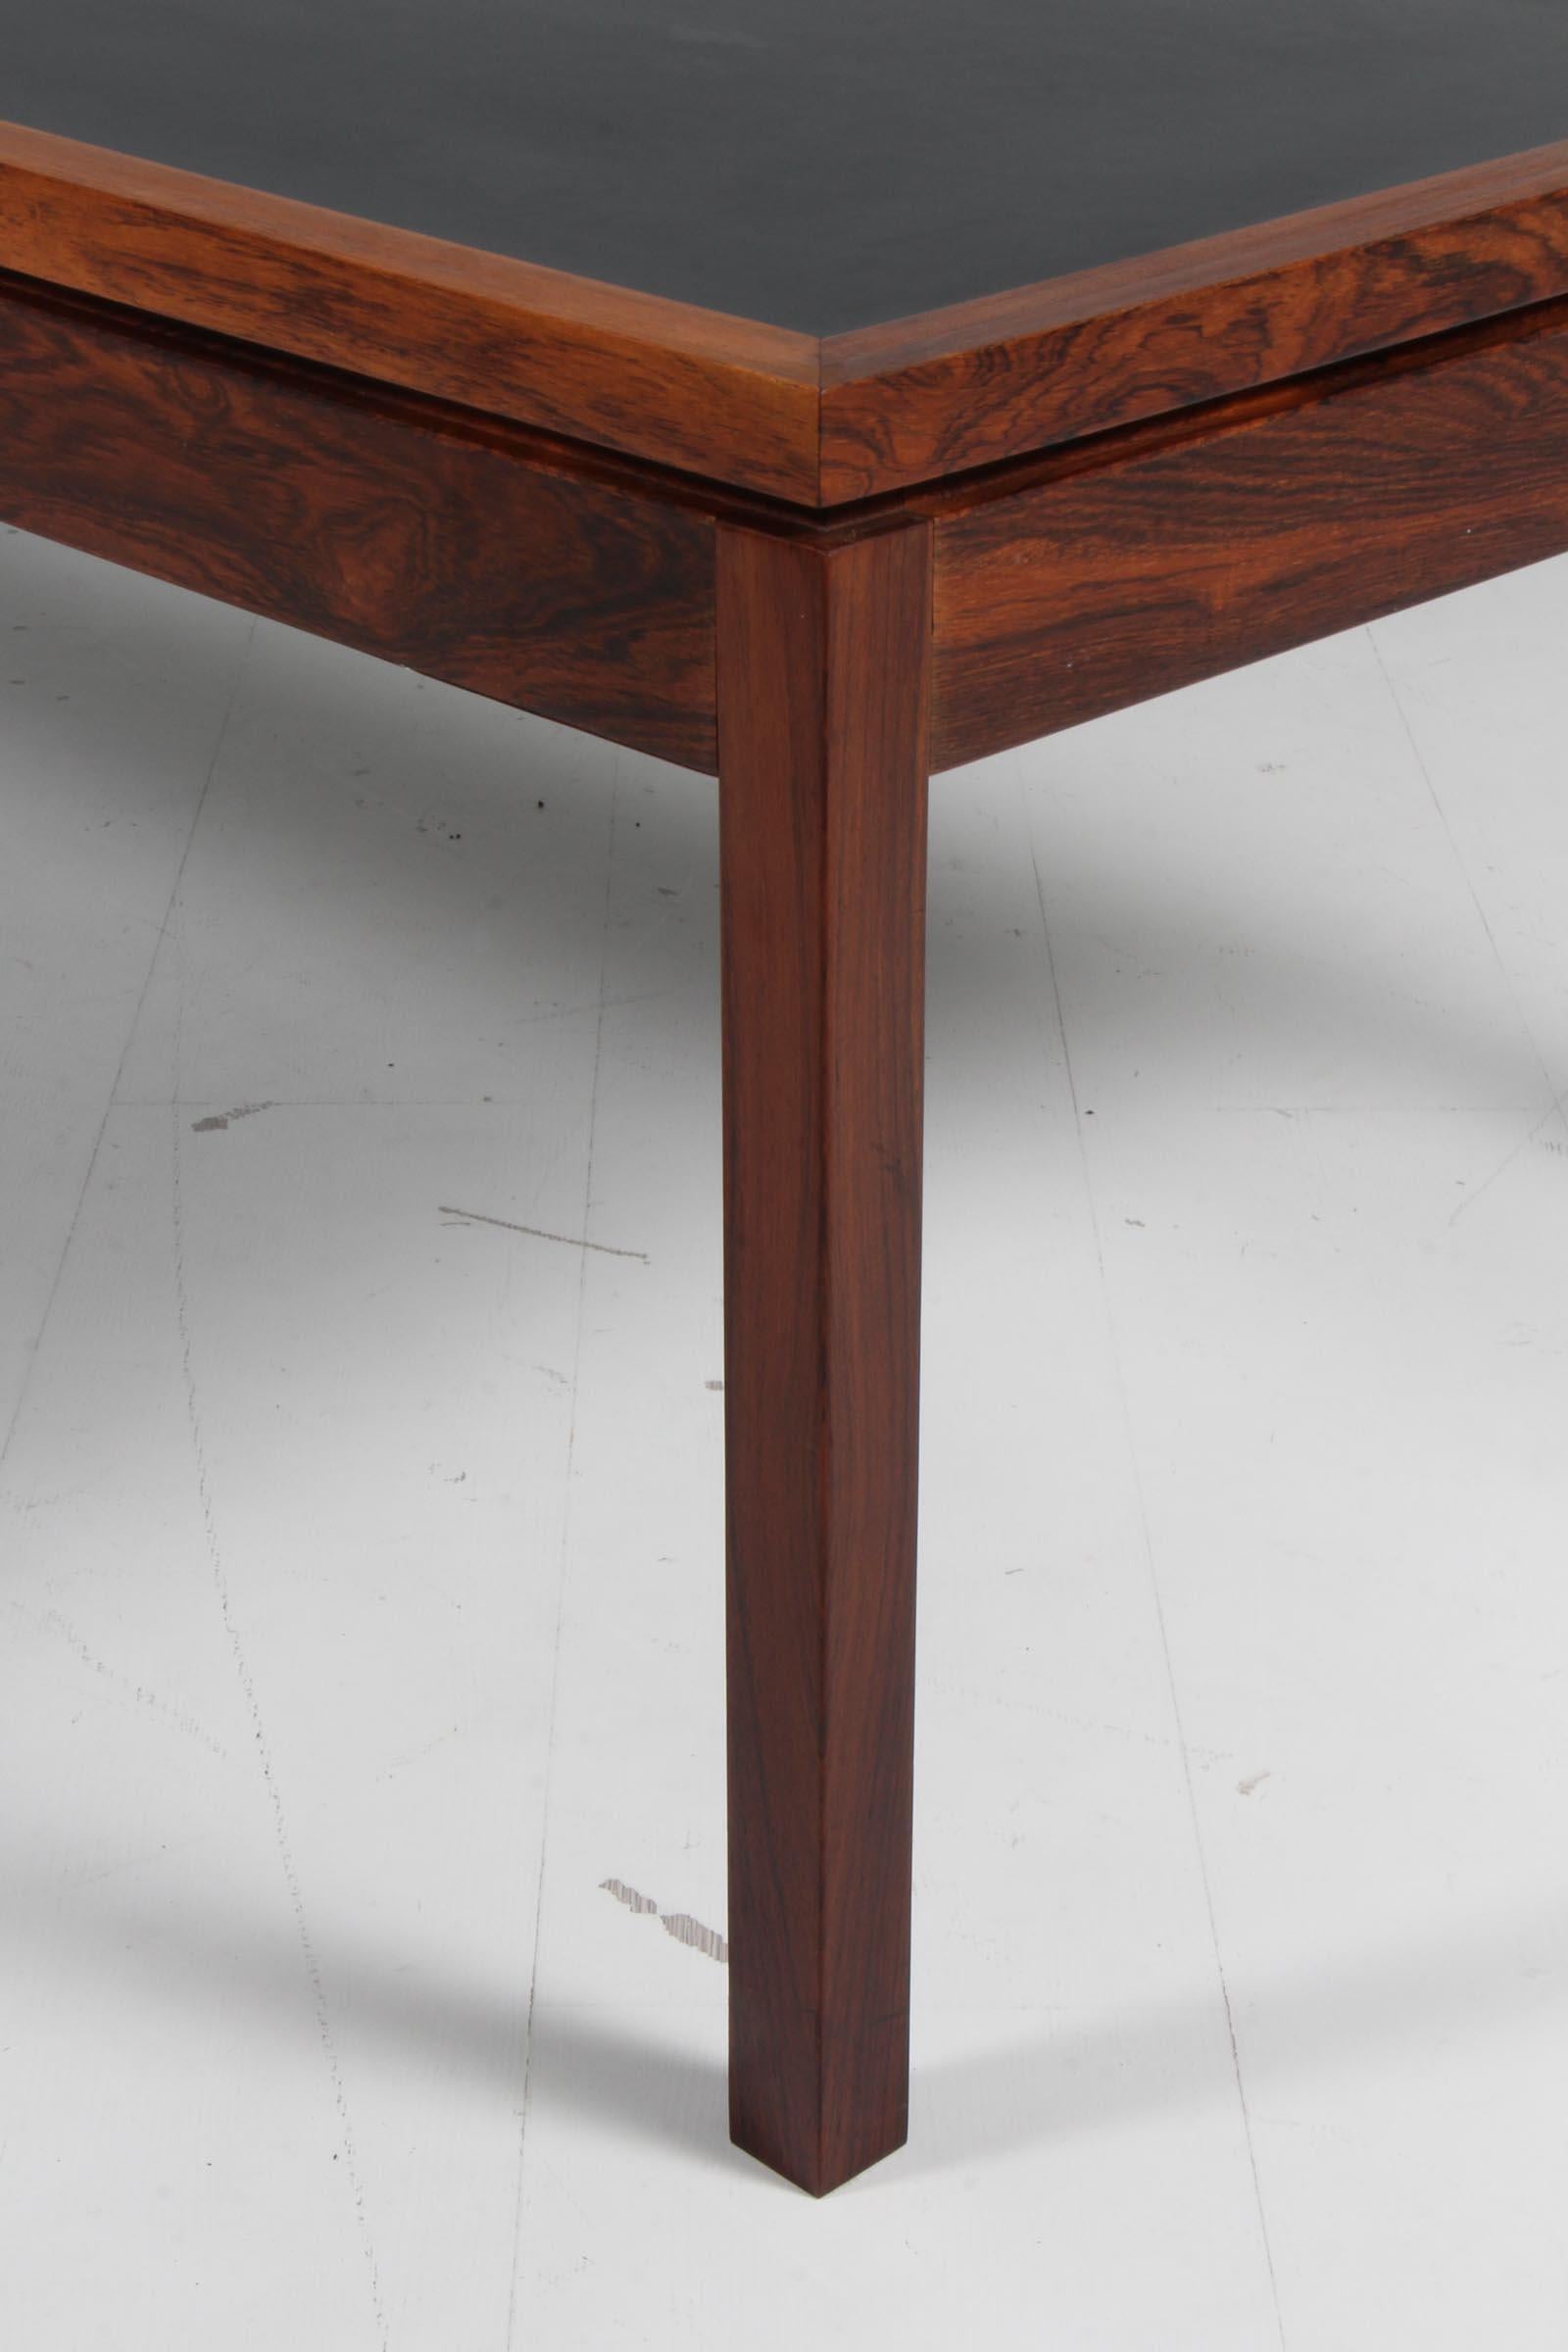 Danish Ejvind A. Johansson coffee table rosewood and black formica, 1960s Denmark For Sale